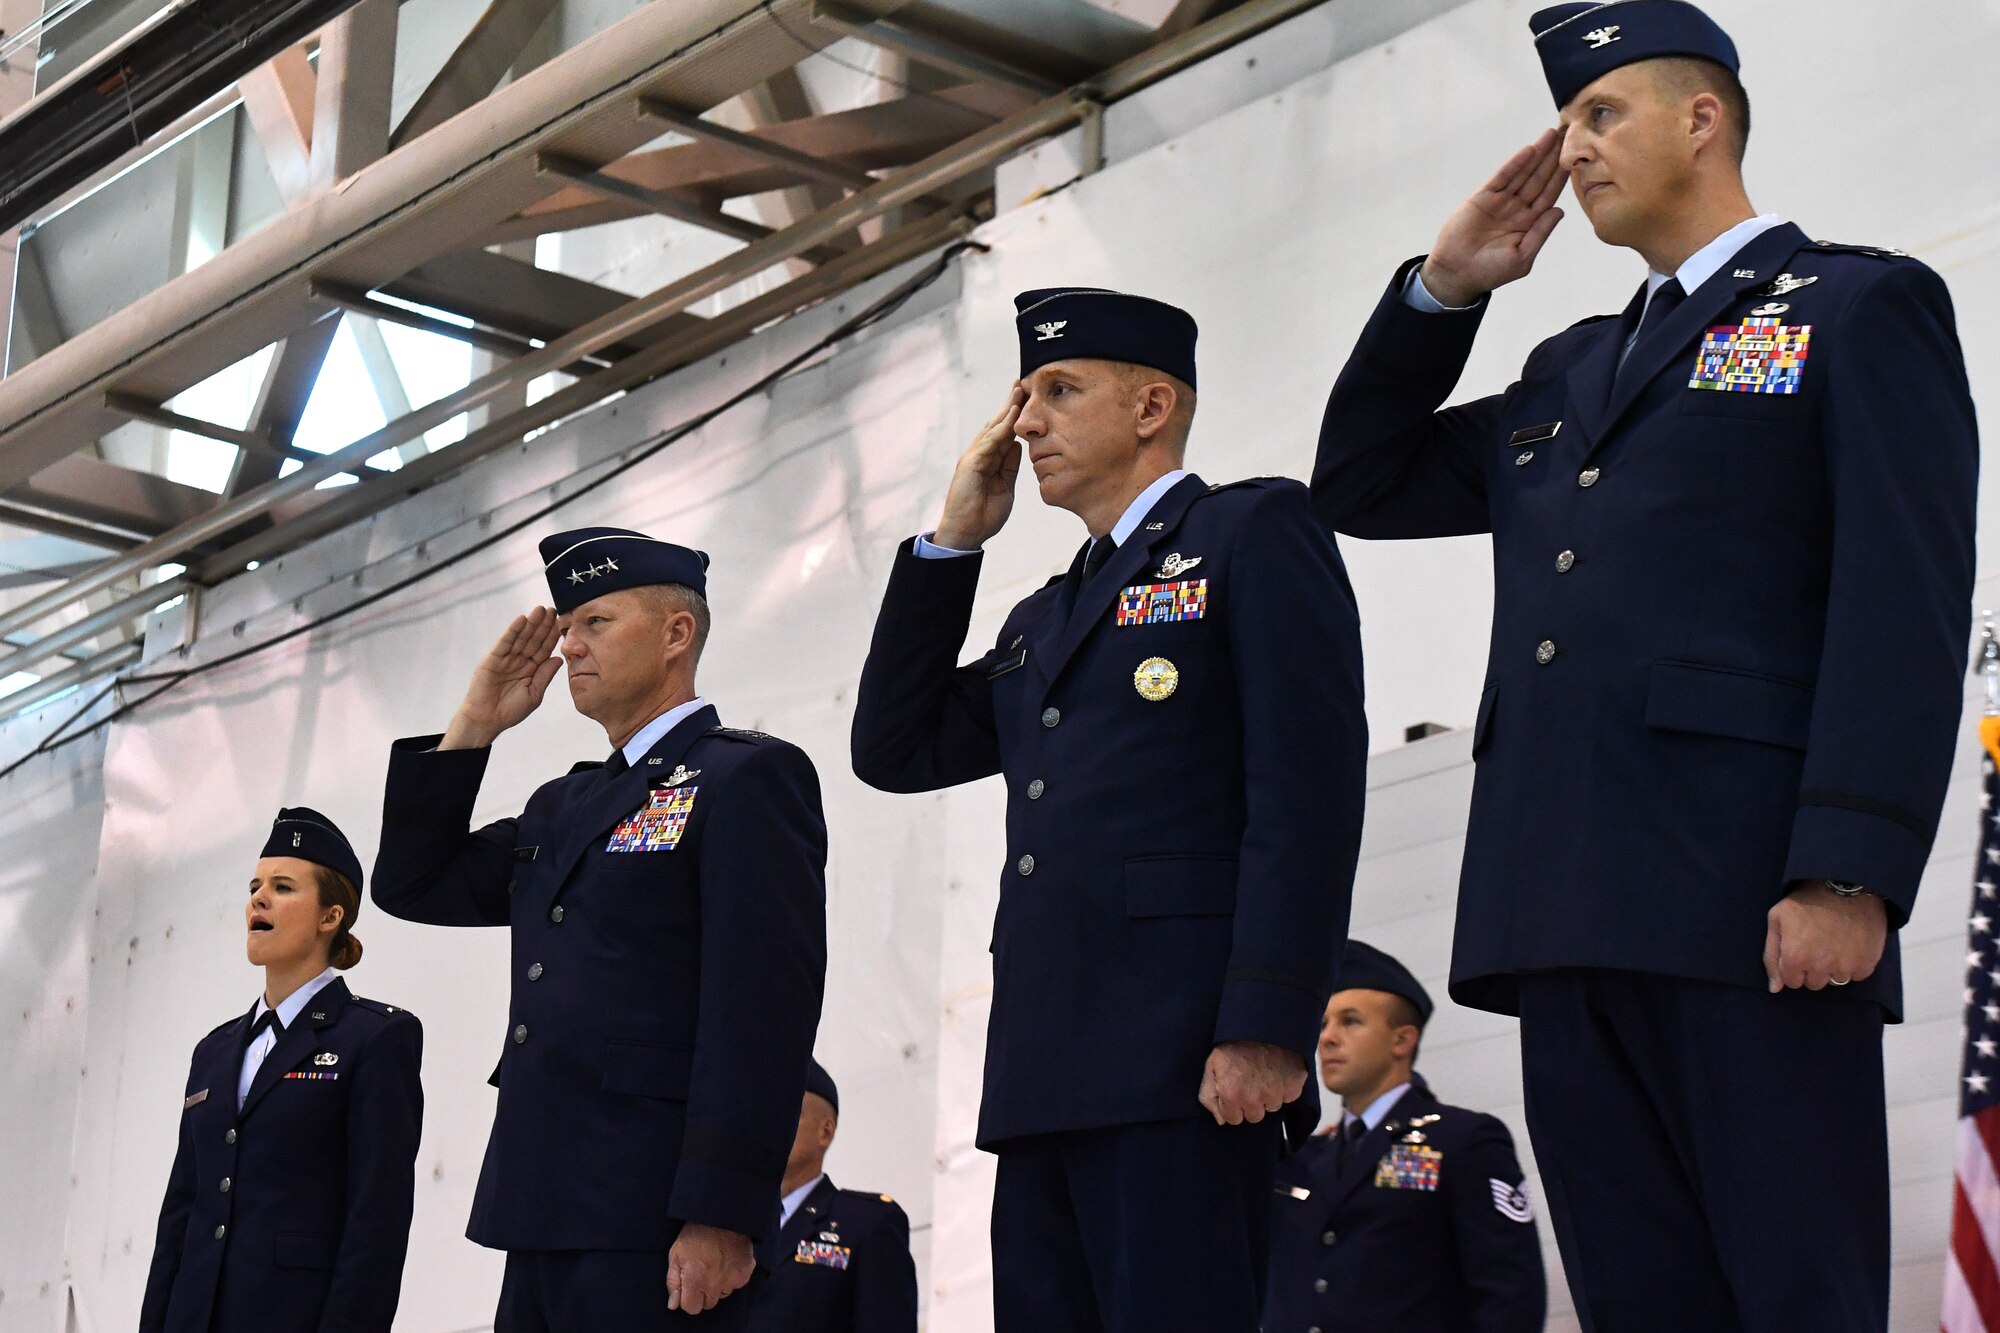 Lt. Gen. Mark Kelly, 12th Air Force commander, Col. Case Cunningham, outgoing 432nd Wing commander and Col. Julian Cheater, incoming 432nd Wing commander, salute during the singing of the national anthem at the 432nd Wing change of command July 6, 2017, at Creech Air Force Base, Nev. During the event, Col. Cheater assumed command from Col. Cunningham in front of a crowd of Airmen, peers and family members. (U.S. Air Force photo/Airman 1st Class James Thompson)